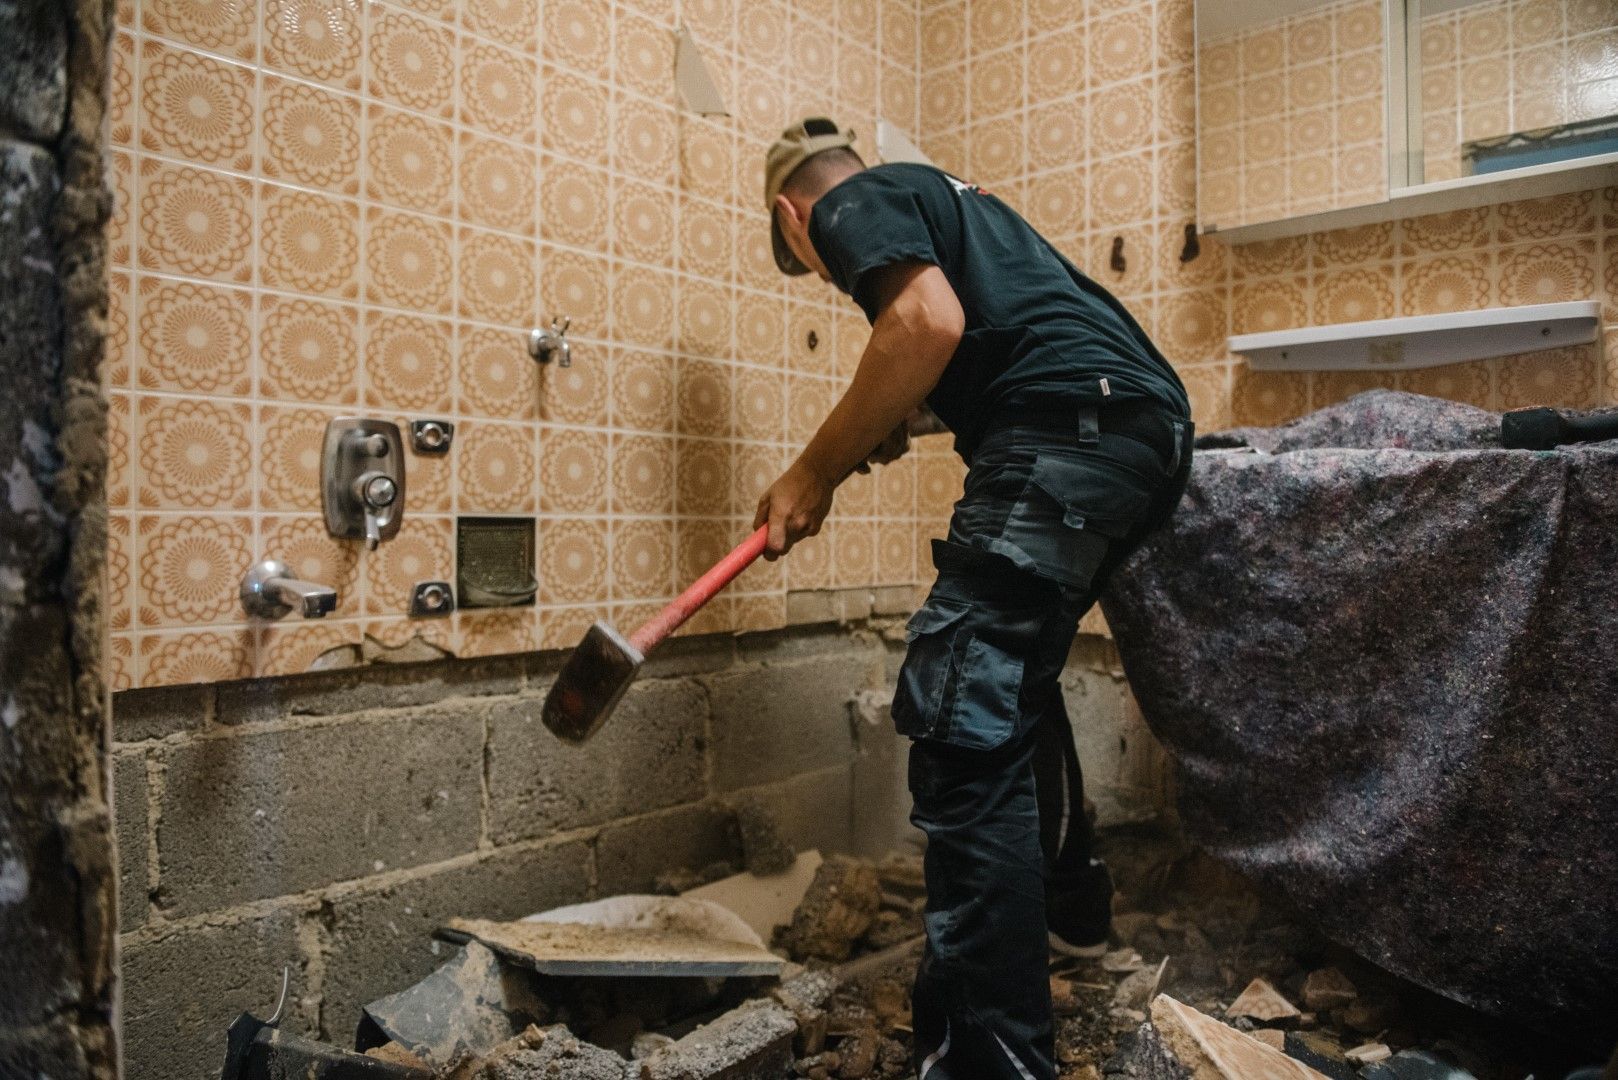 An image of a person working on Bathroom Tile Remodeling Services in Airdrie, AB